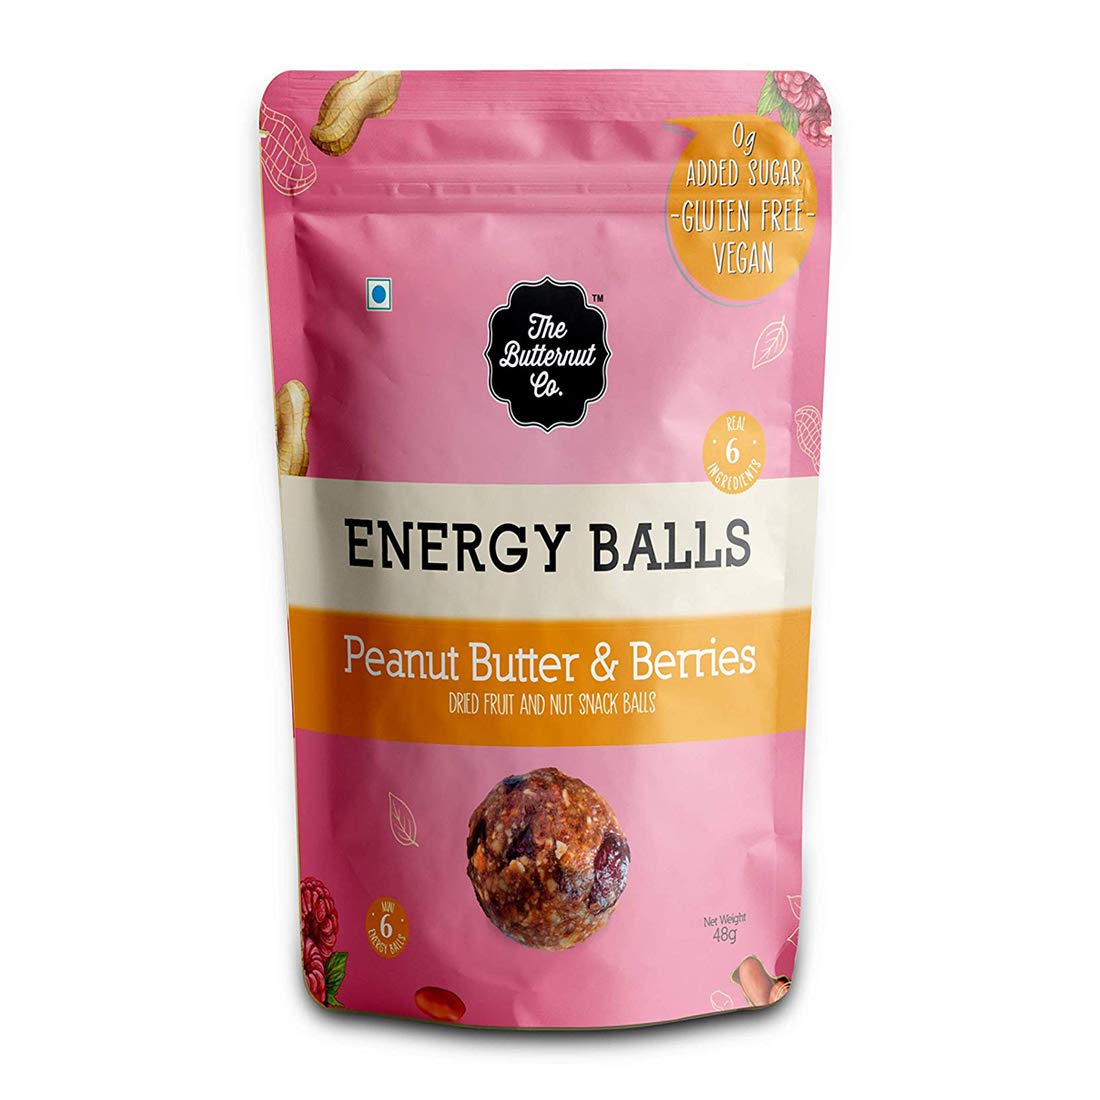 The Butternut Co. Energy Balls Peanut Butter & Berries - Dates, Dried Fruit & Nut Snack Balls 288g (Pack of 6) 100% Natural, No Sugar, Vegan, No Preservatives, Clean Label